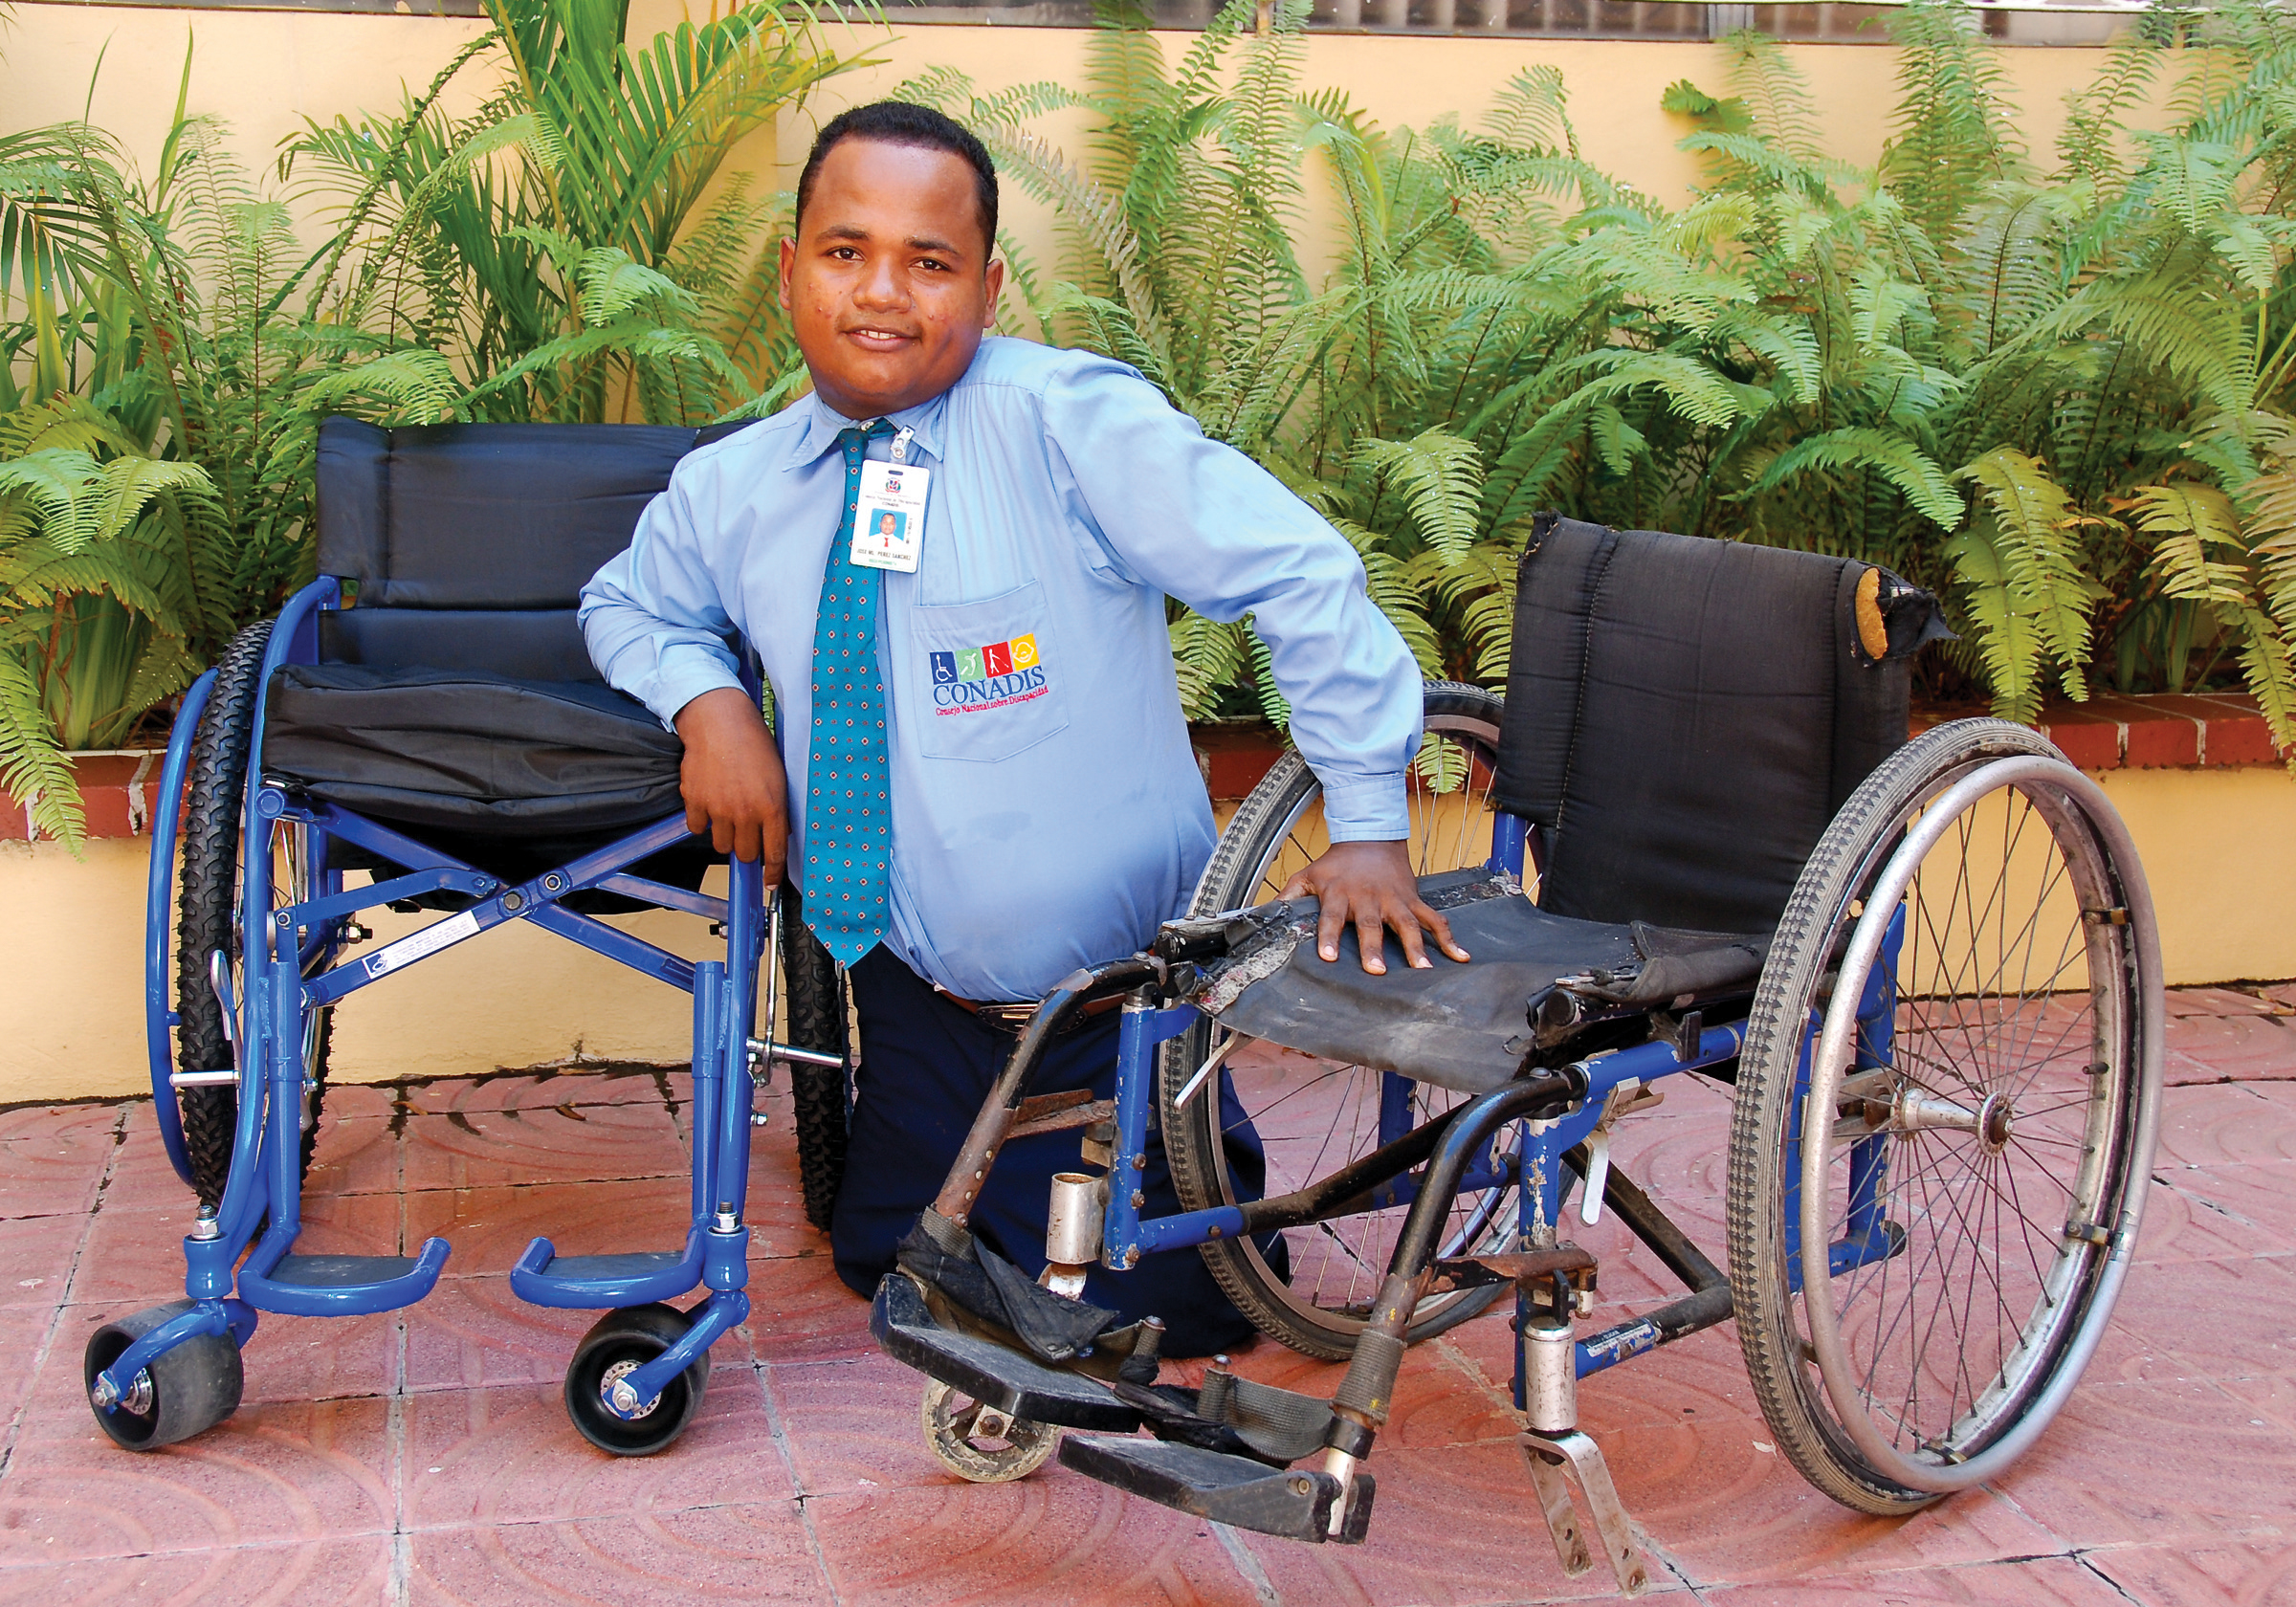 A man from the Dominican Republic balancing himself between a rusting, torn, dirty wheelchair and a new, shiny black and blue wheelchair.